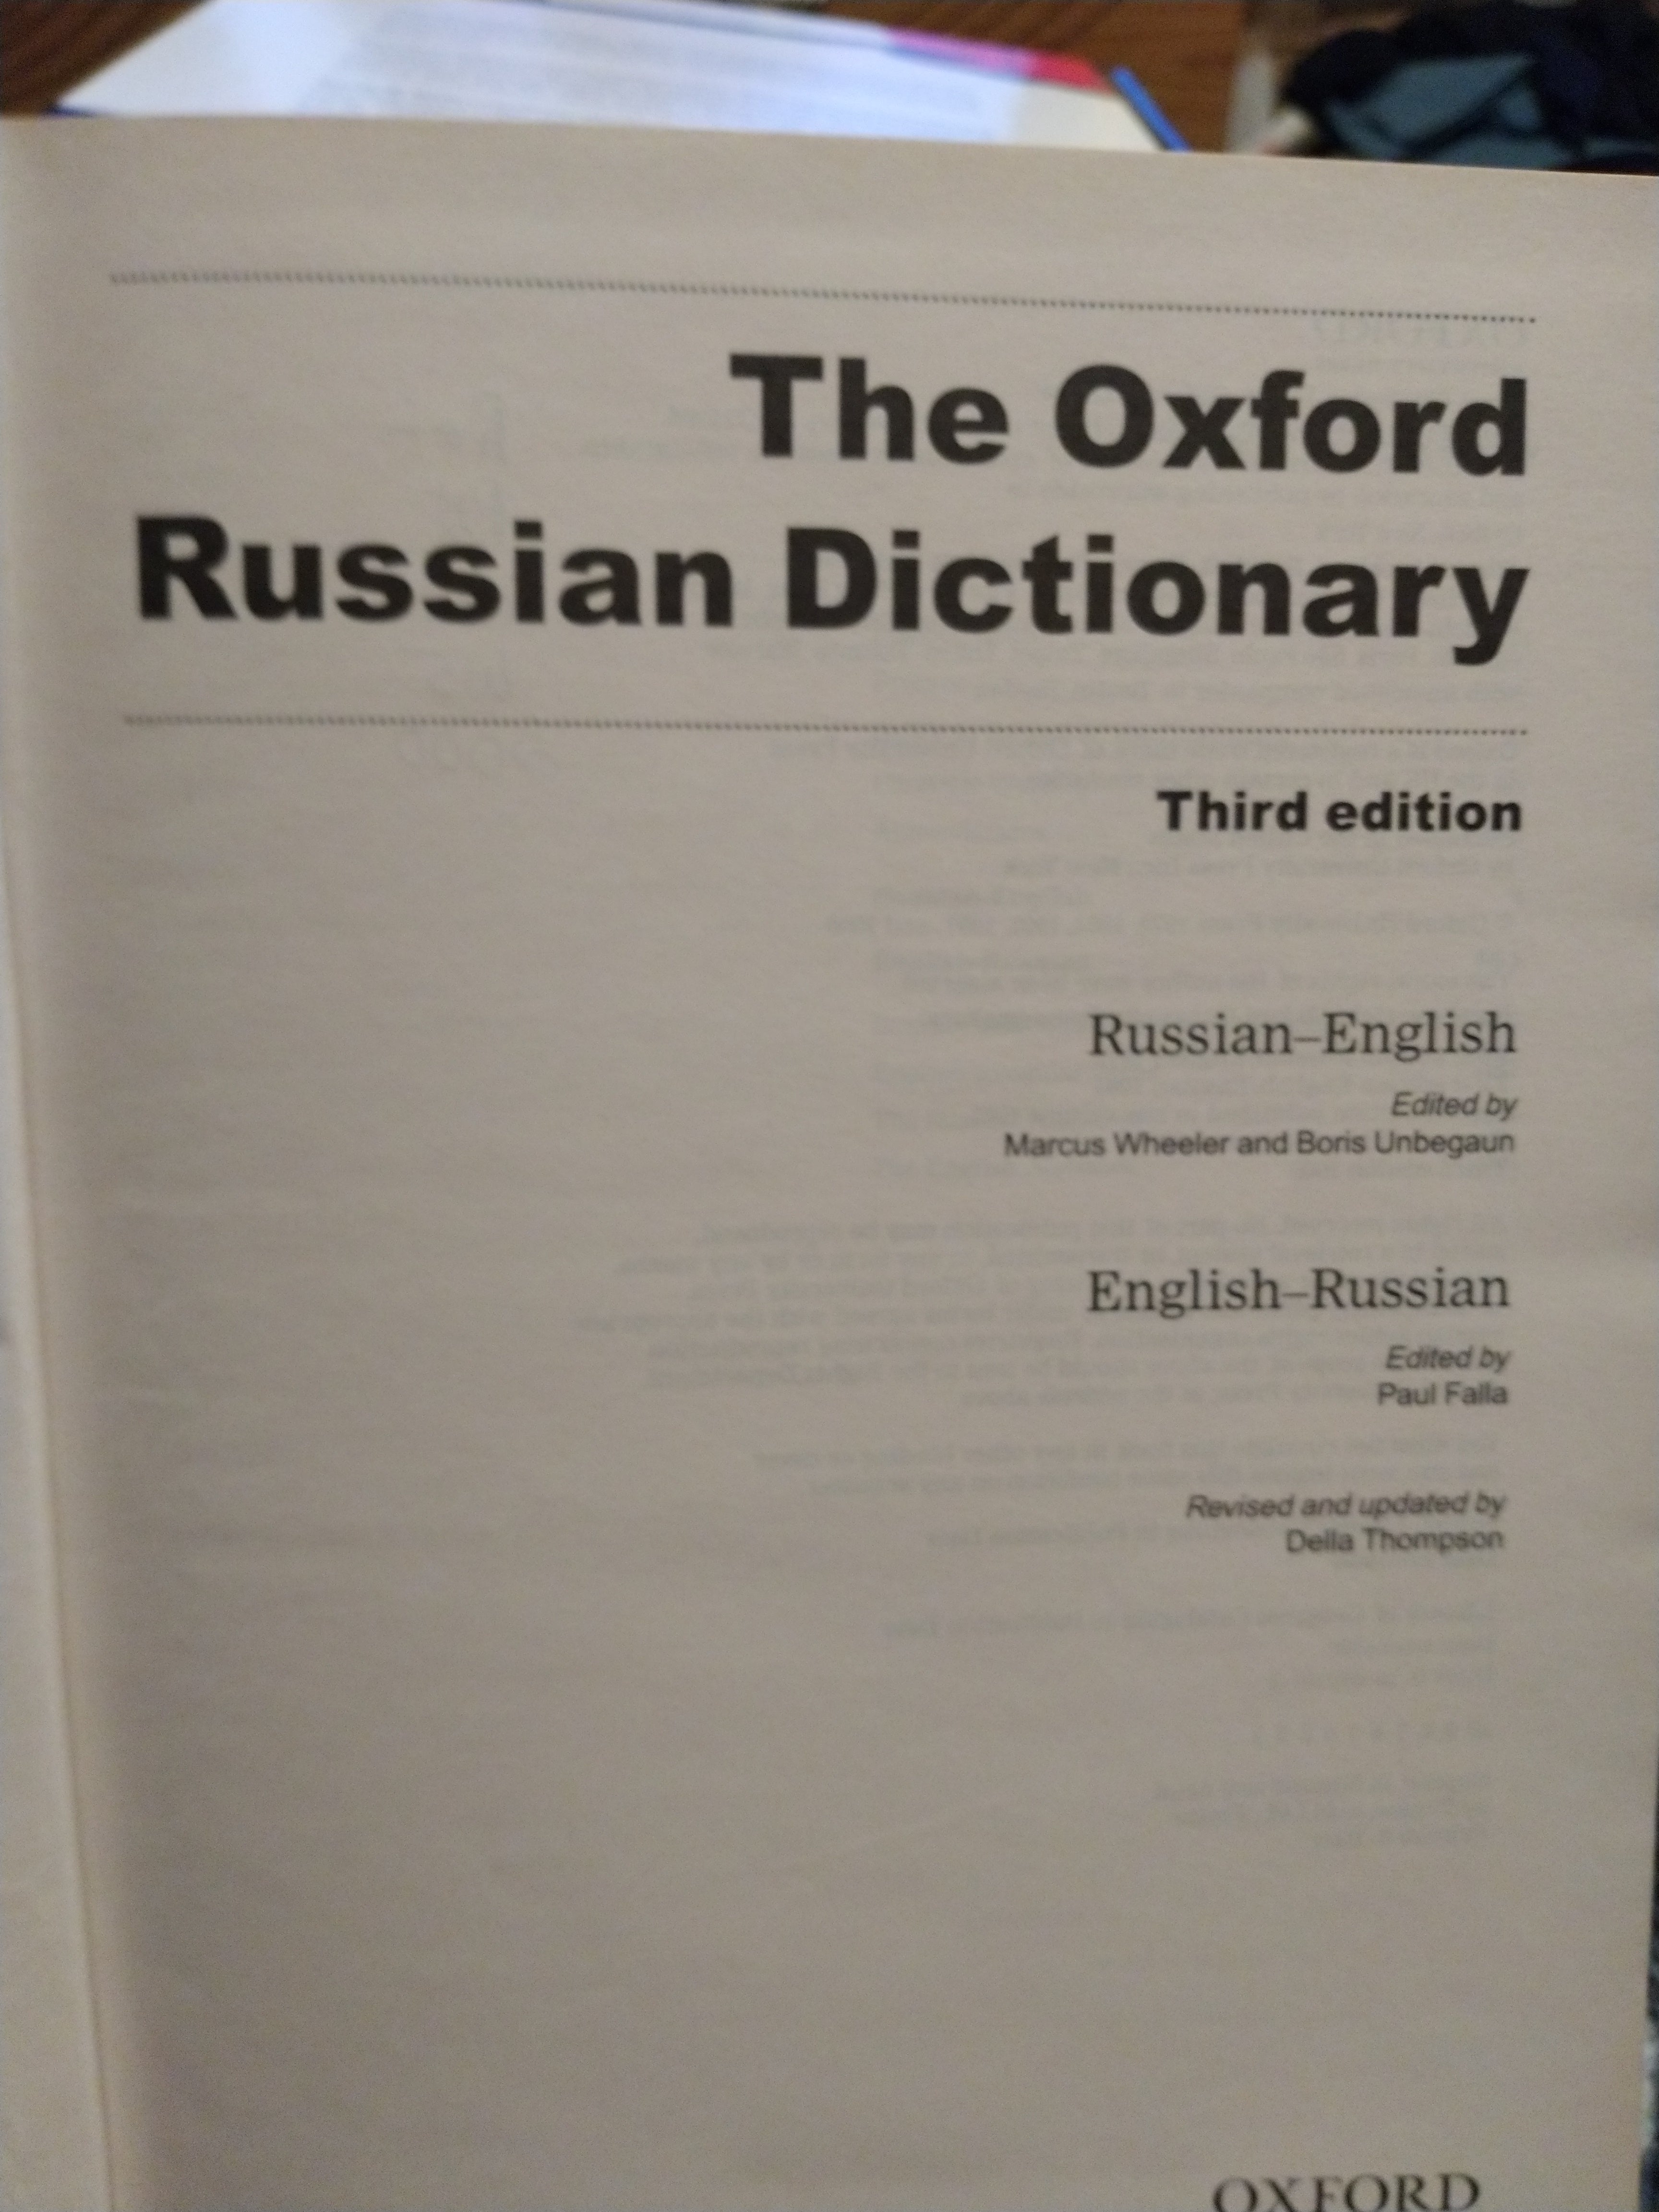 Russian　Dictionary　Wheeler,　by　Marcus　Hardcover　Pangobooks　The　Oxford